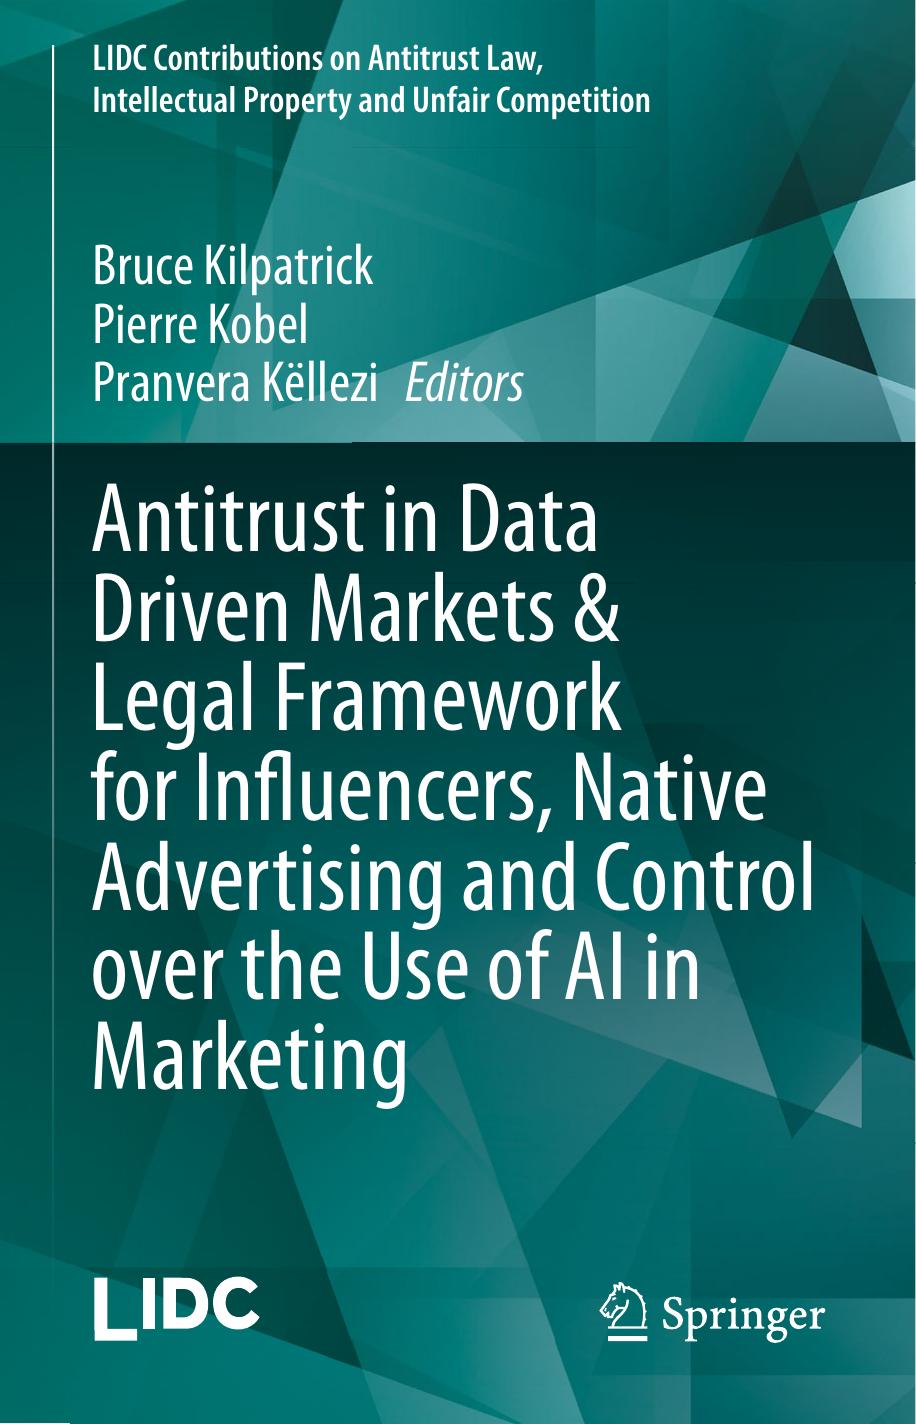 Antitrust in Data Driven Markets & Legal Framework for Influencers, Native Advertising and Control over the Use of AI in Marketing by Bruce Kilpatrick Pierre Kobel Pranvera Këllezi